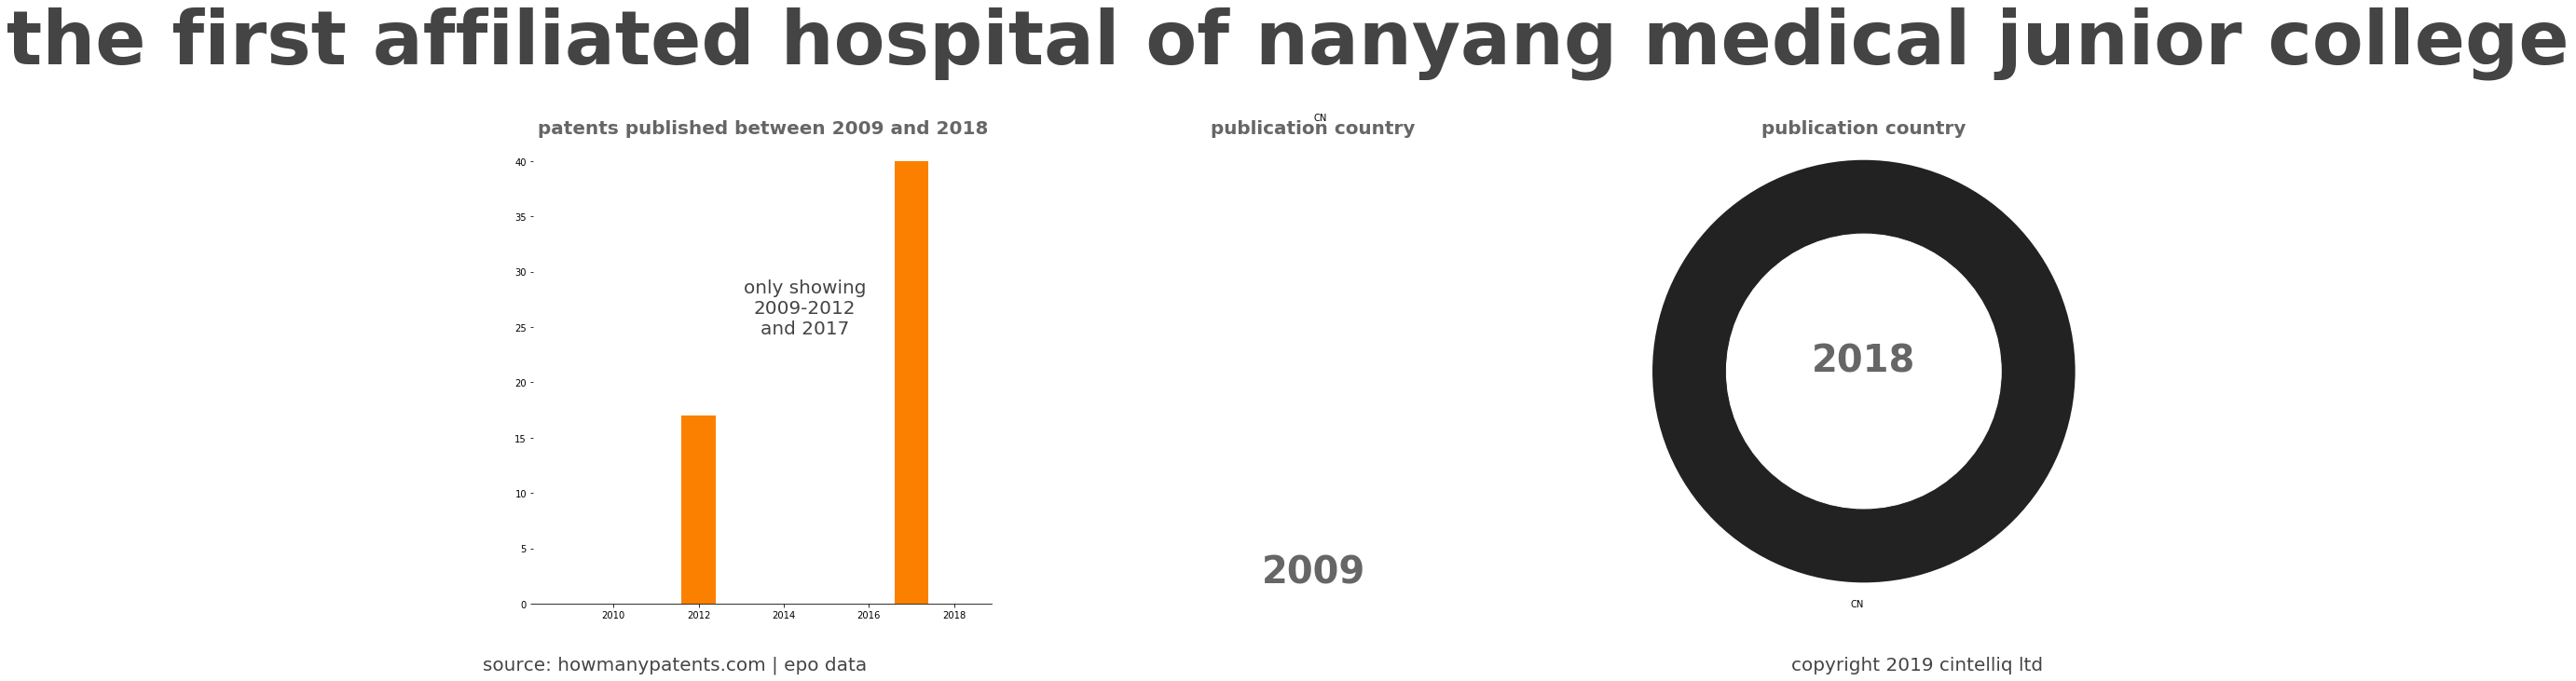 summary of patents for The First Affiliated Hospital Of Nanyang Medical Junior College